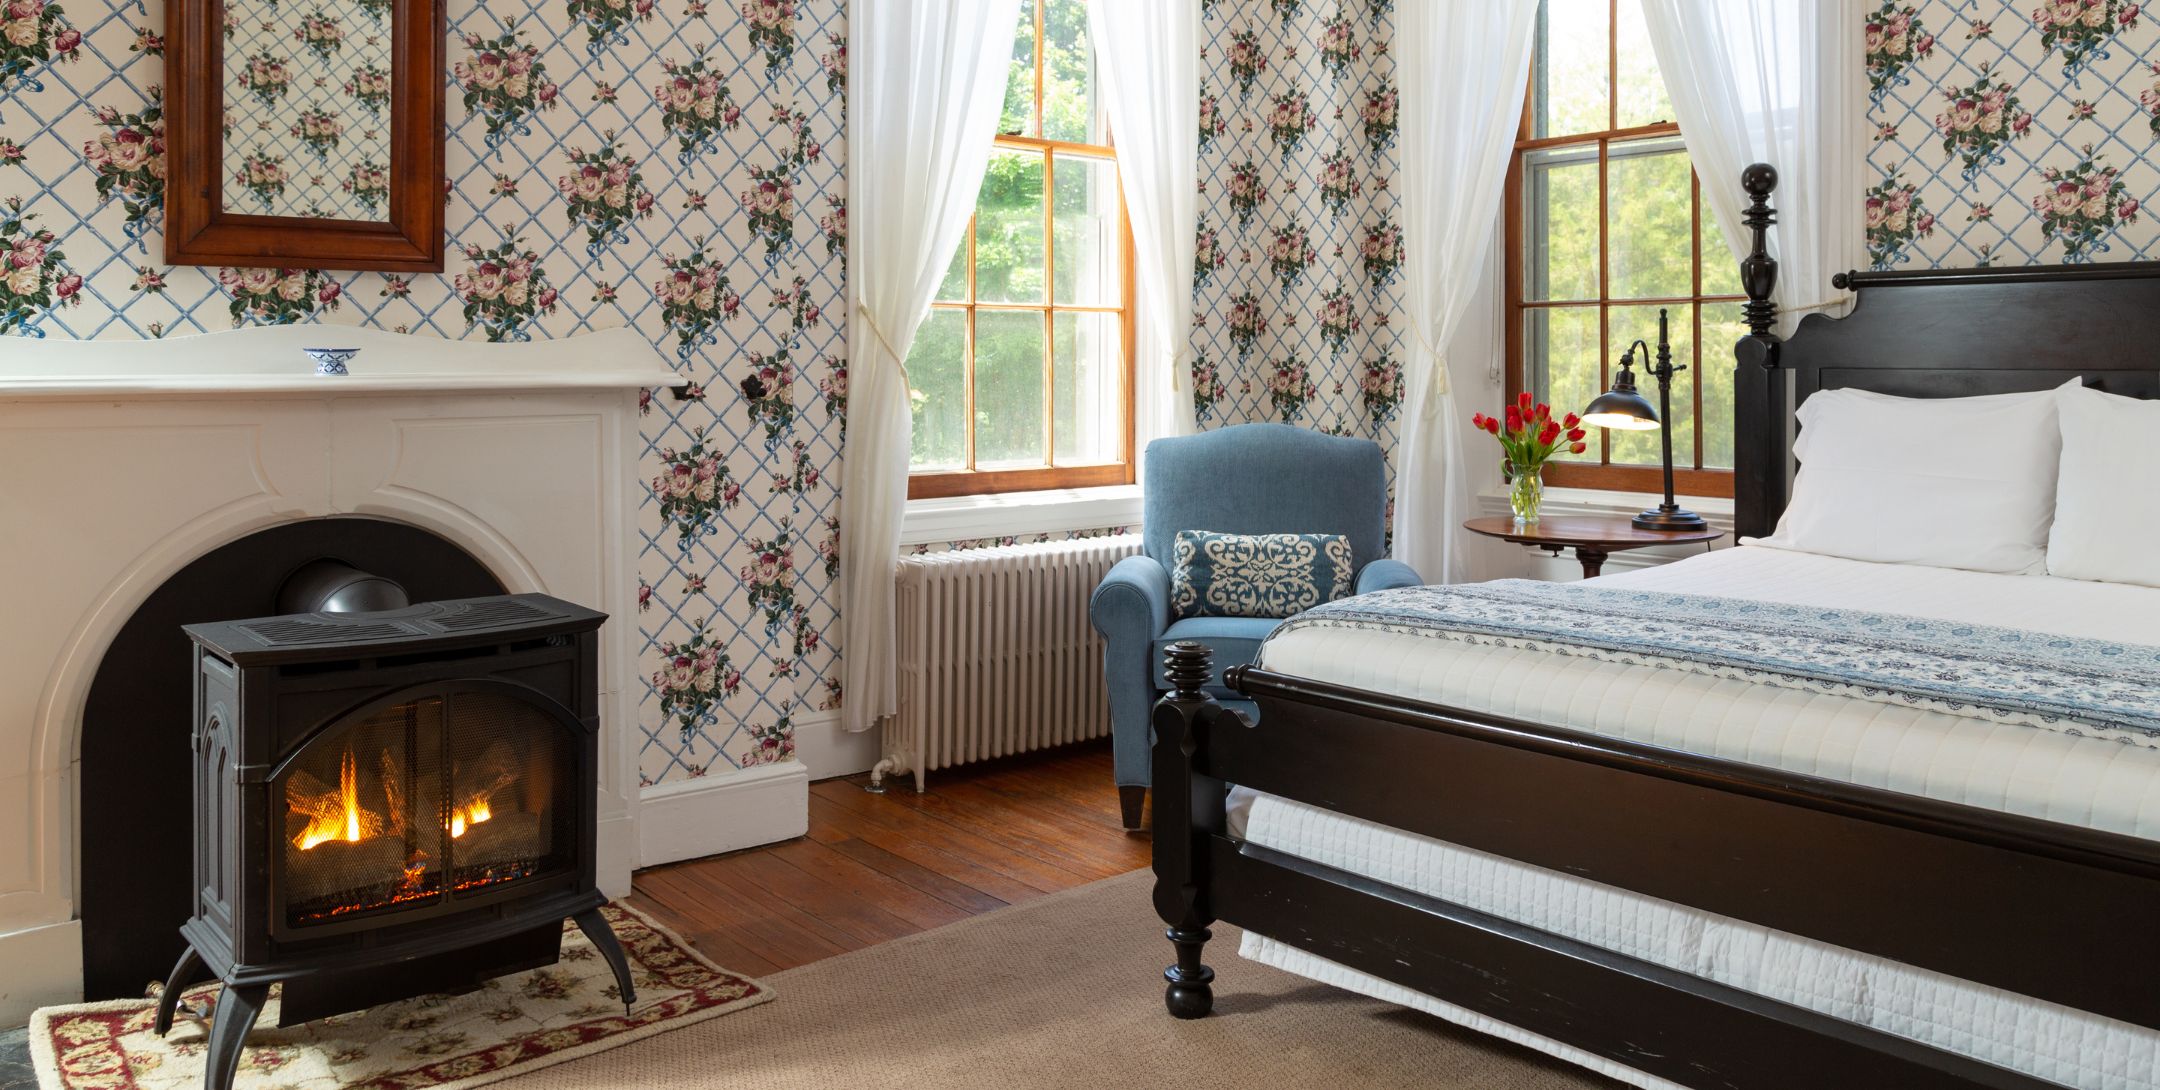 Wooden bed, hardwood floors, wallpapered walls, big window, fire stove, and comfy chair